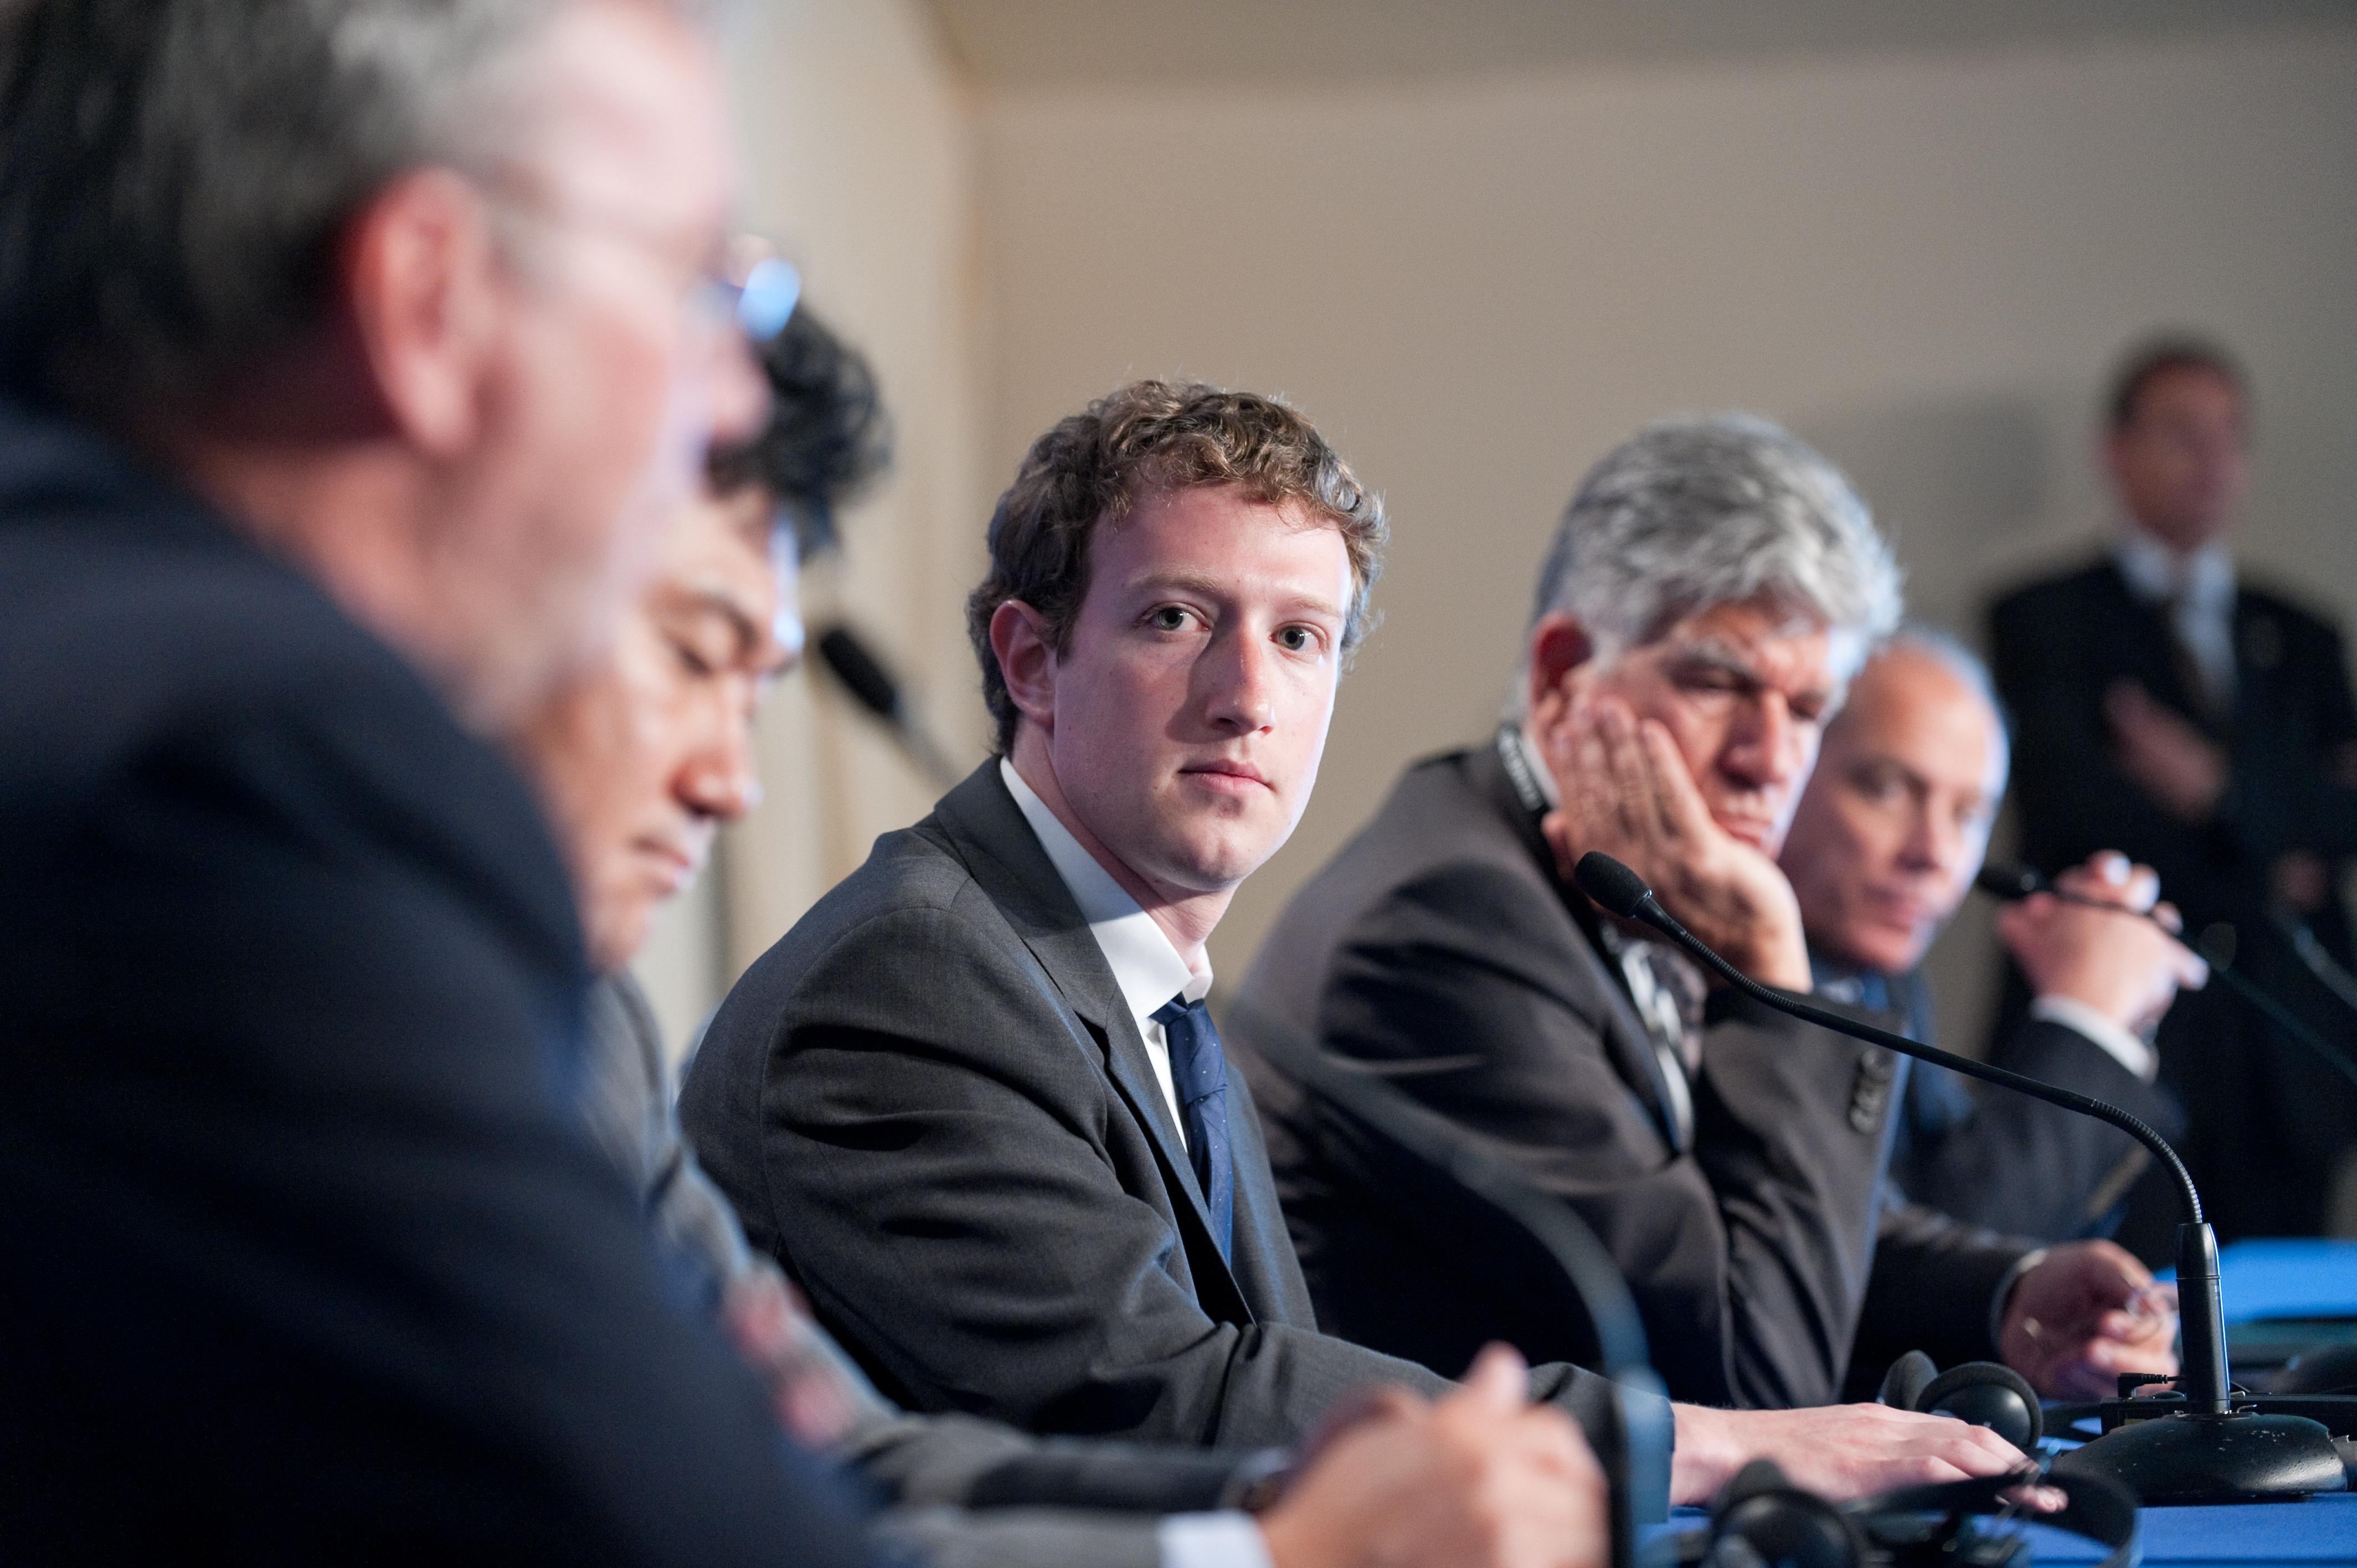 DEAUVILLE, FRANCE - MAY 26, 2011 : Facebook CEO Mark Zuckerberg Press conference at the summit G8/G20 about new technologies - Deauville, France on May 26 2011